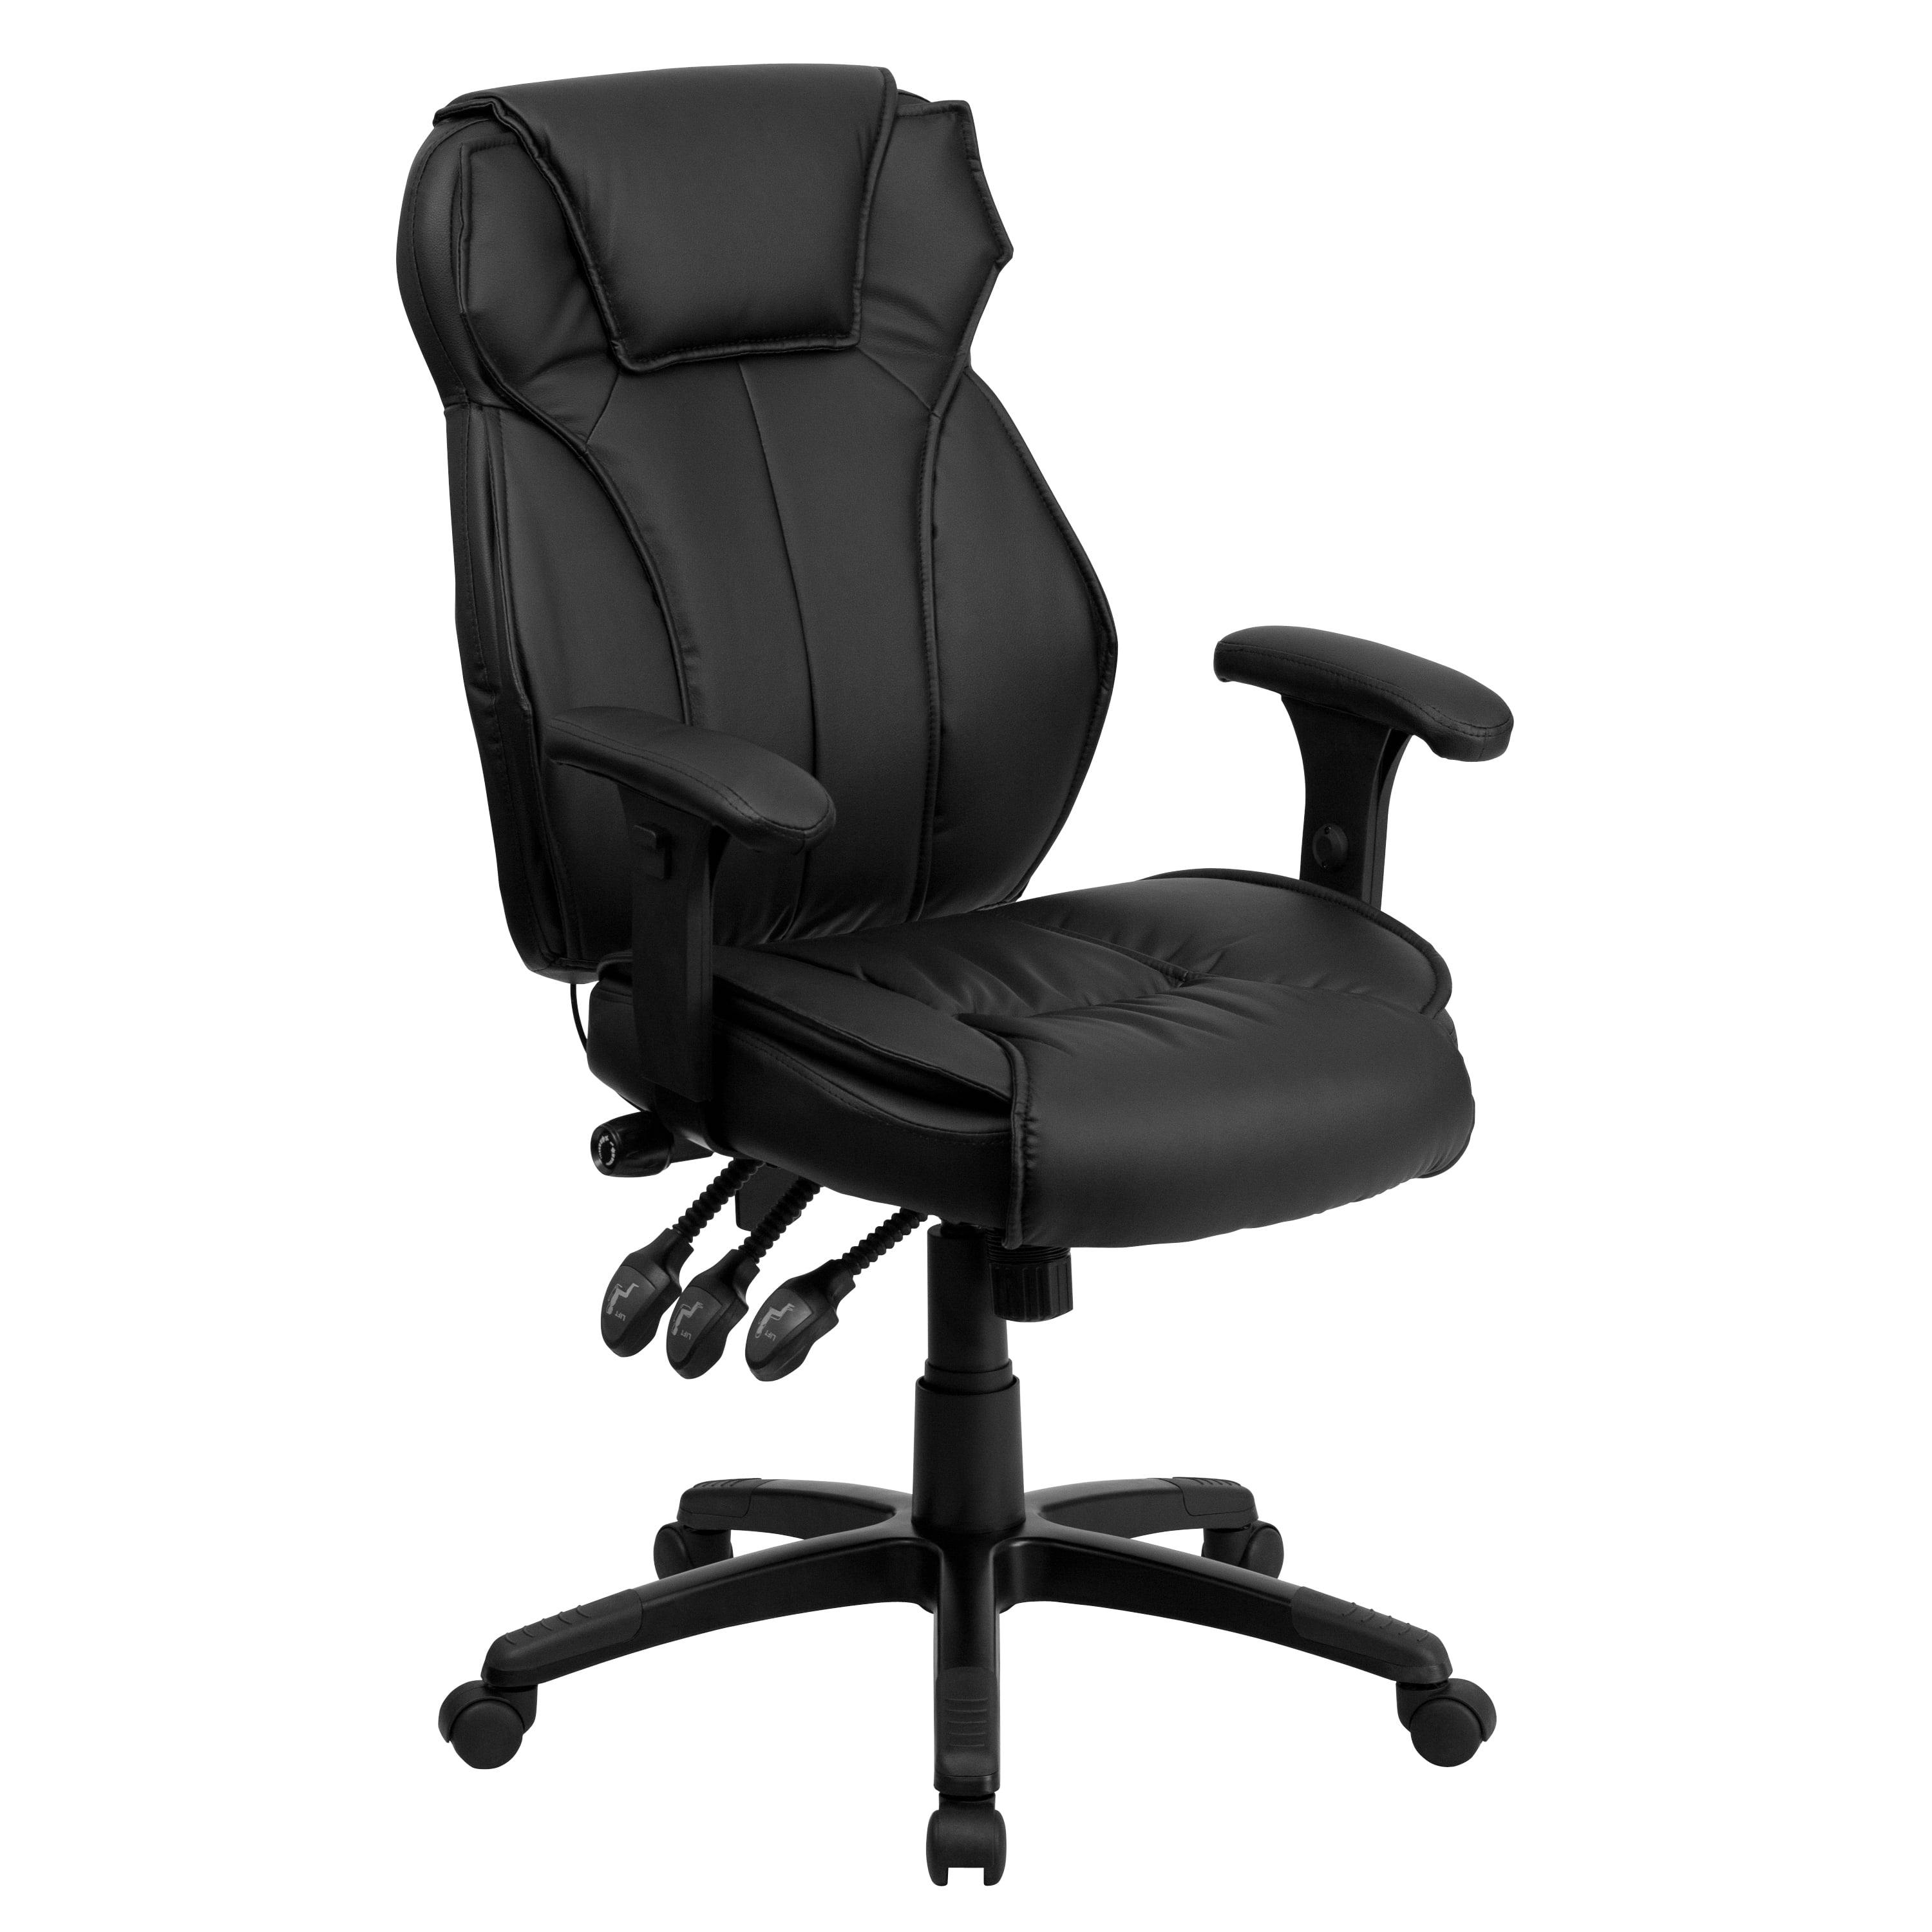 High-Back Black LeatherSoft Executive Swivel Chair with Adjustable Arms